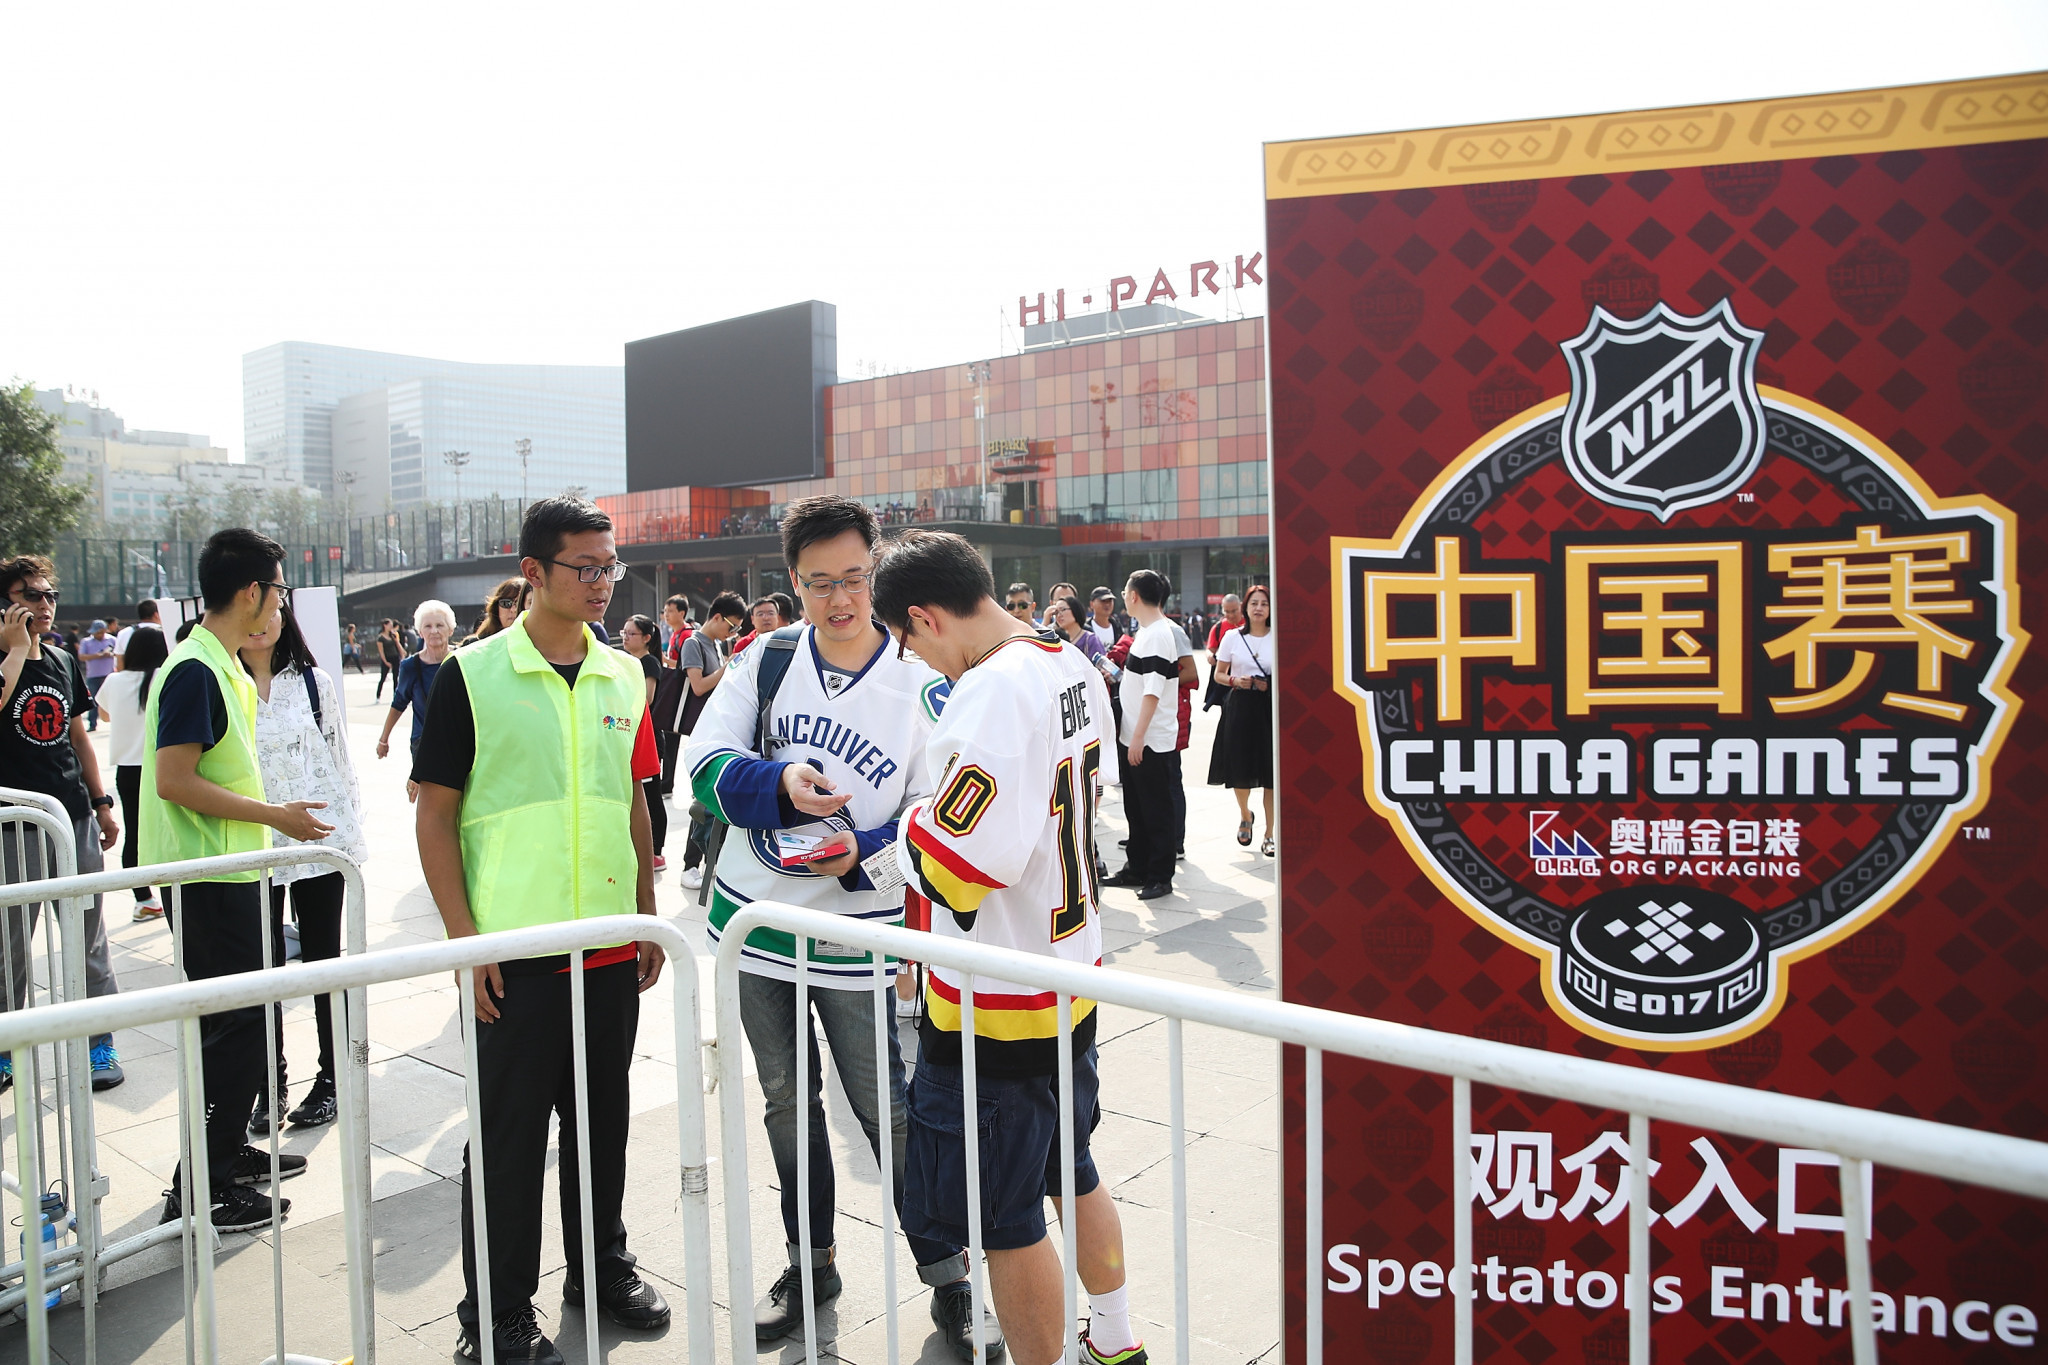 Two pre-season NHL matches were held in China for the first time last year and regular season games are possibility in the future, it has been claimed ©Getty Images